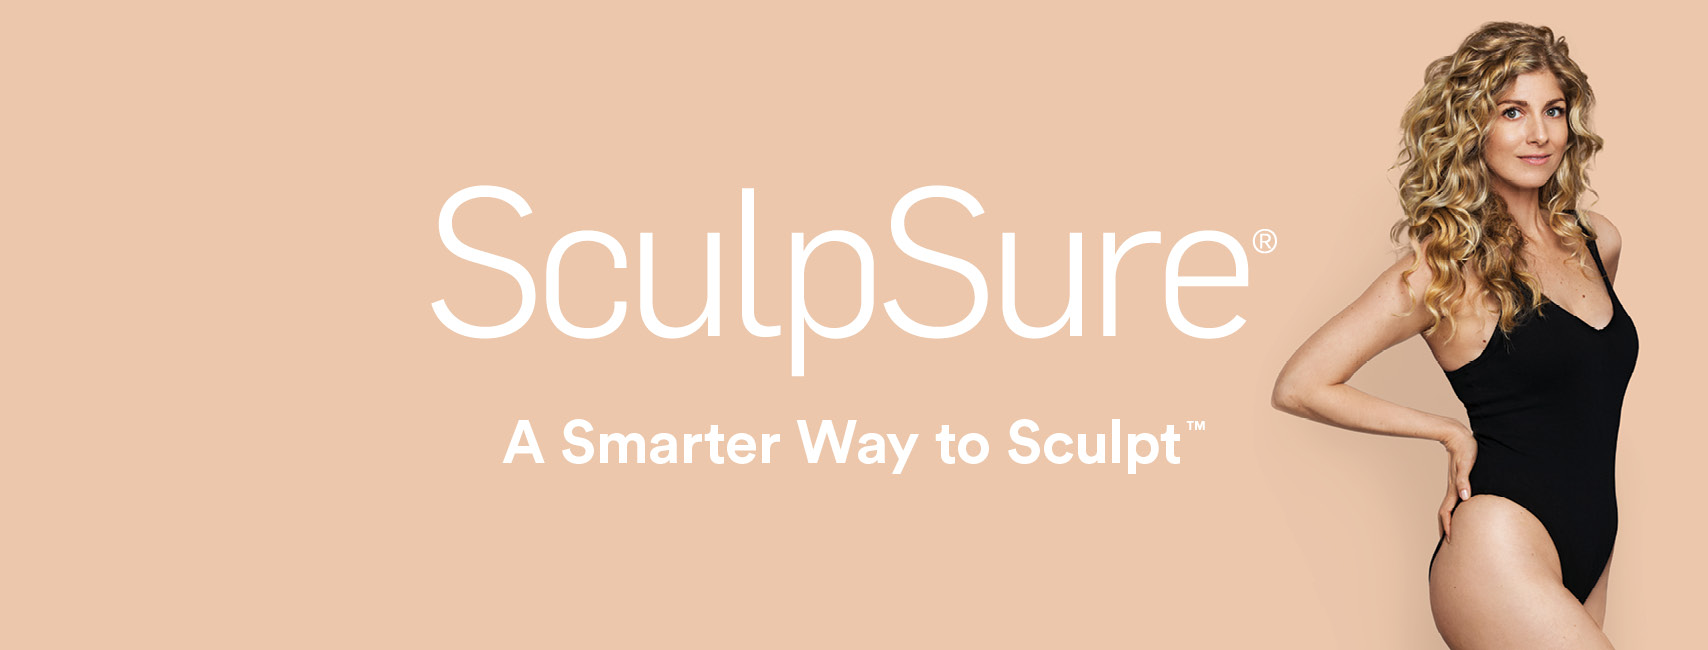 SculpSure Body Contouring at Youthology